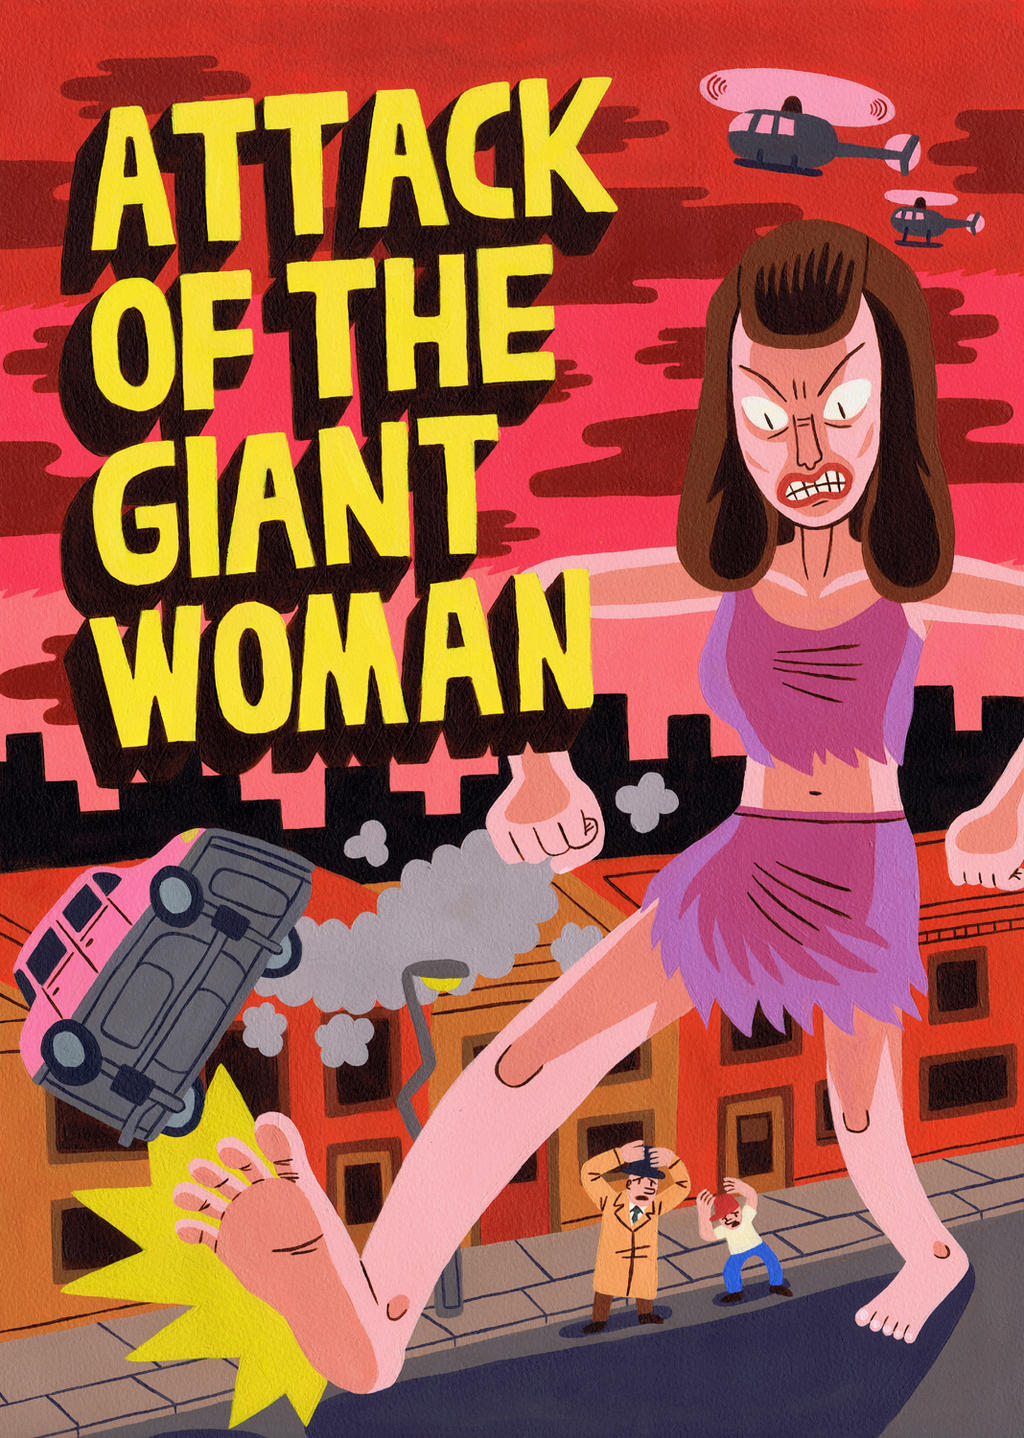 attack_of_the_giant_woman_by_teagle-dacy